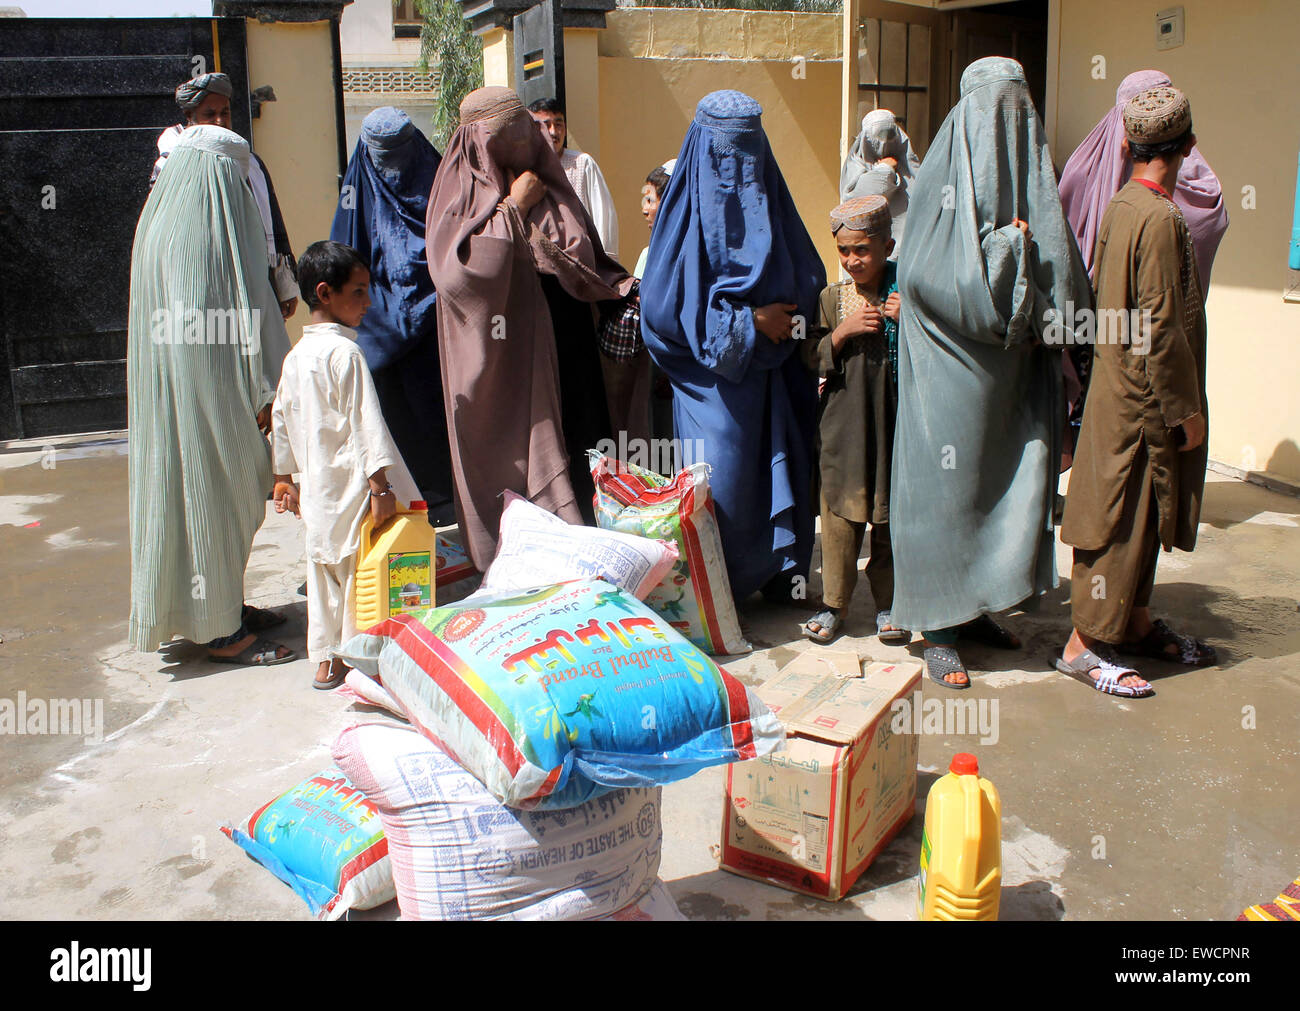 Kandahar, Afghanistan. 23rd June, 2015. Afghan women and children wait to receive food donated by rich people during the holy month of Ramadan in Kandahar province, southern Afghanistan, June 23, 2015. © Sanaullah/Xinhua/Alamy Live News Stock Photo